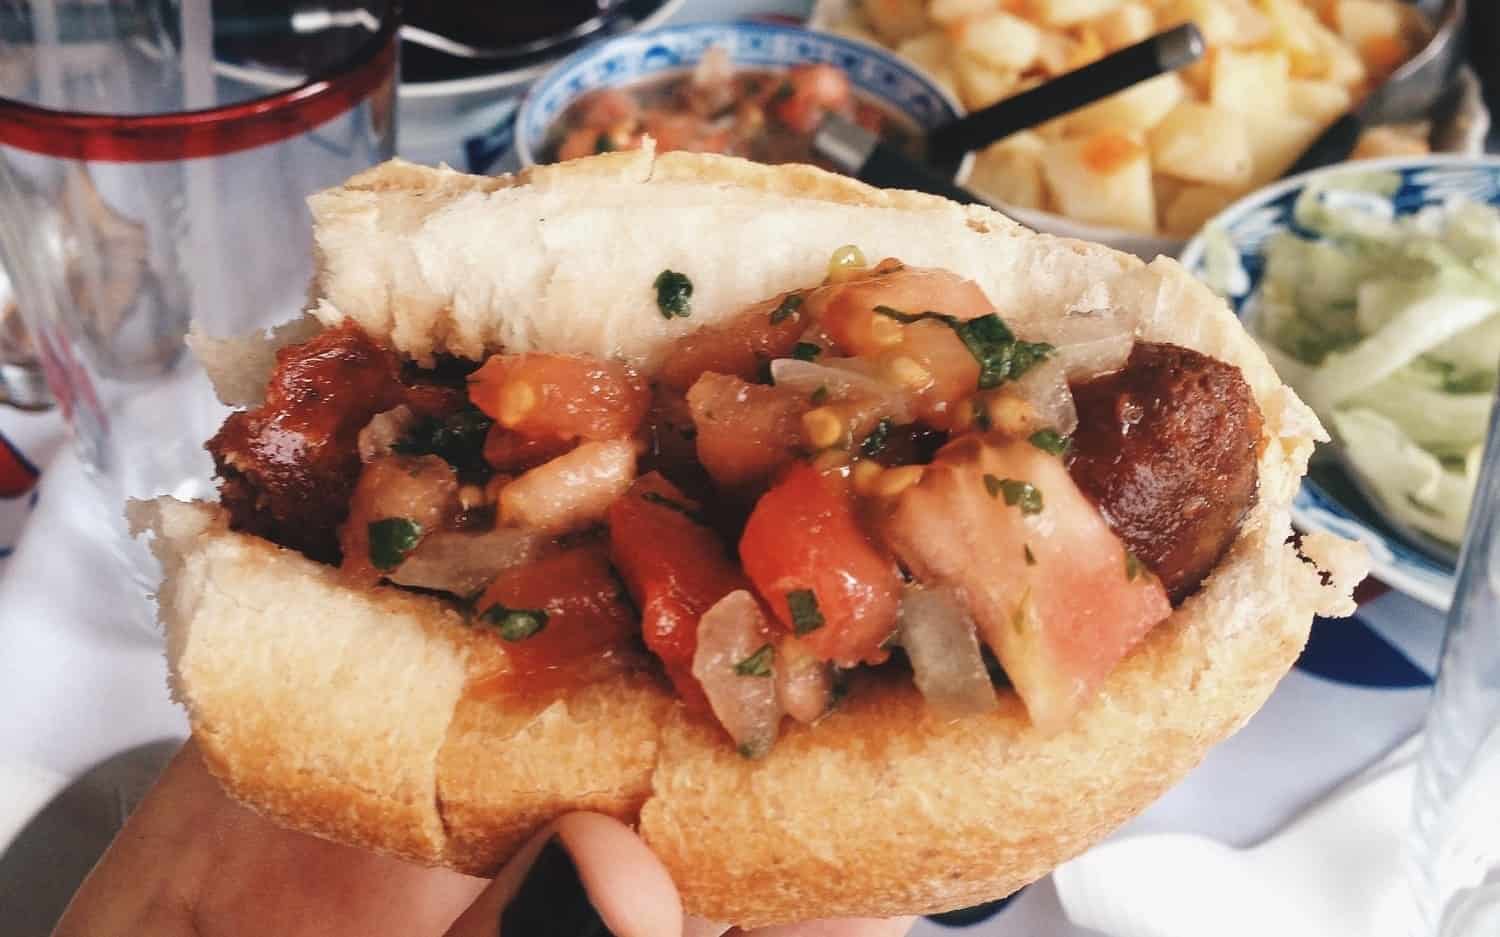 A Chilean sausage on a bun, choripan qualifies as one of the best sandwiches in the world.